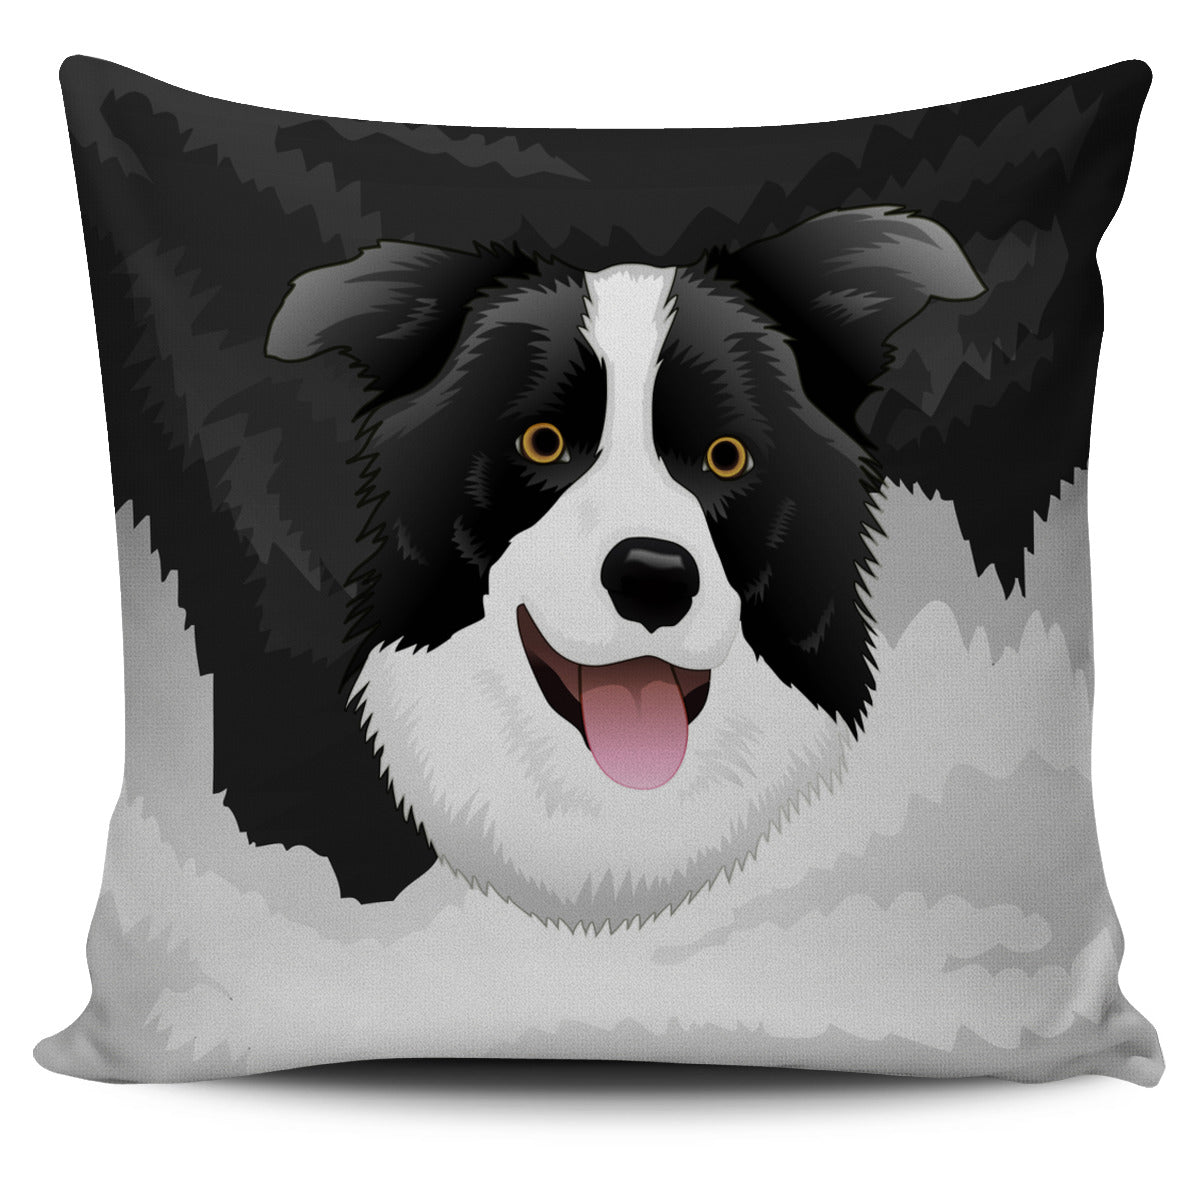 Real Border Collie Pillow Cover